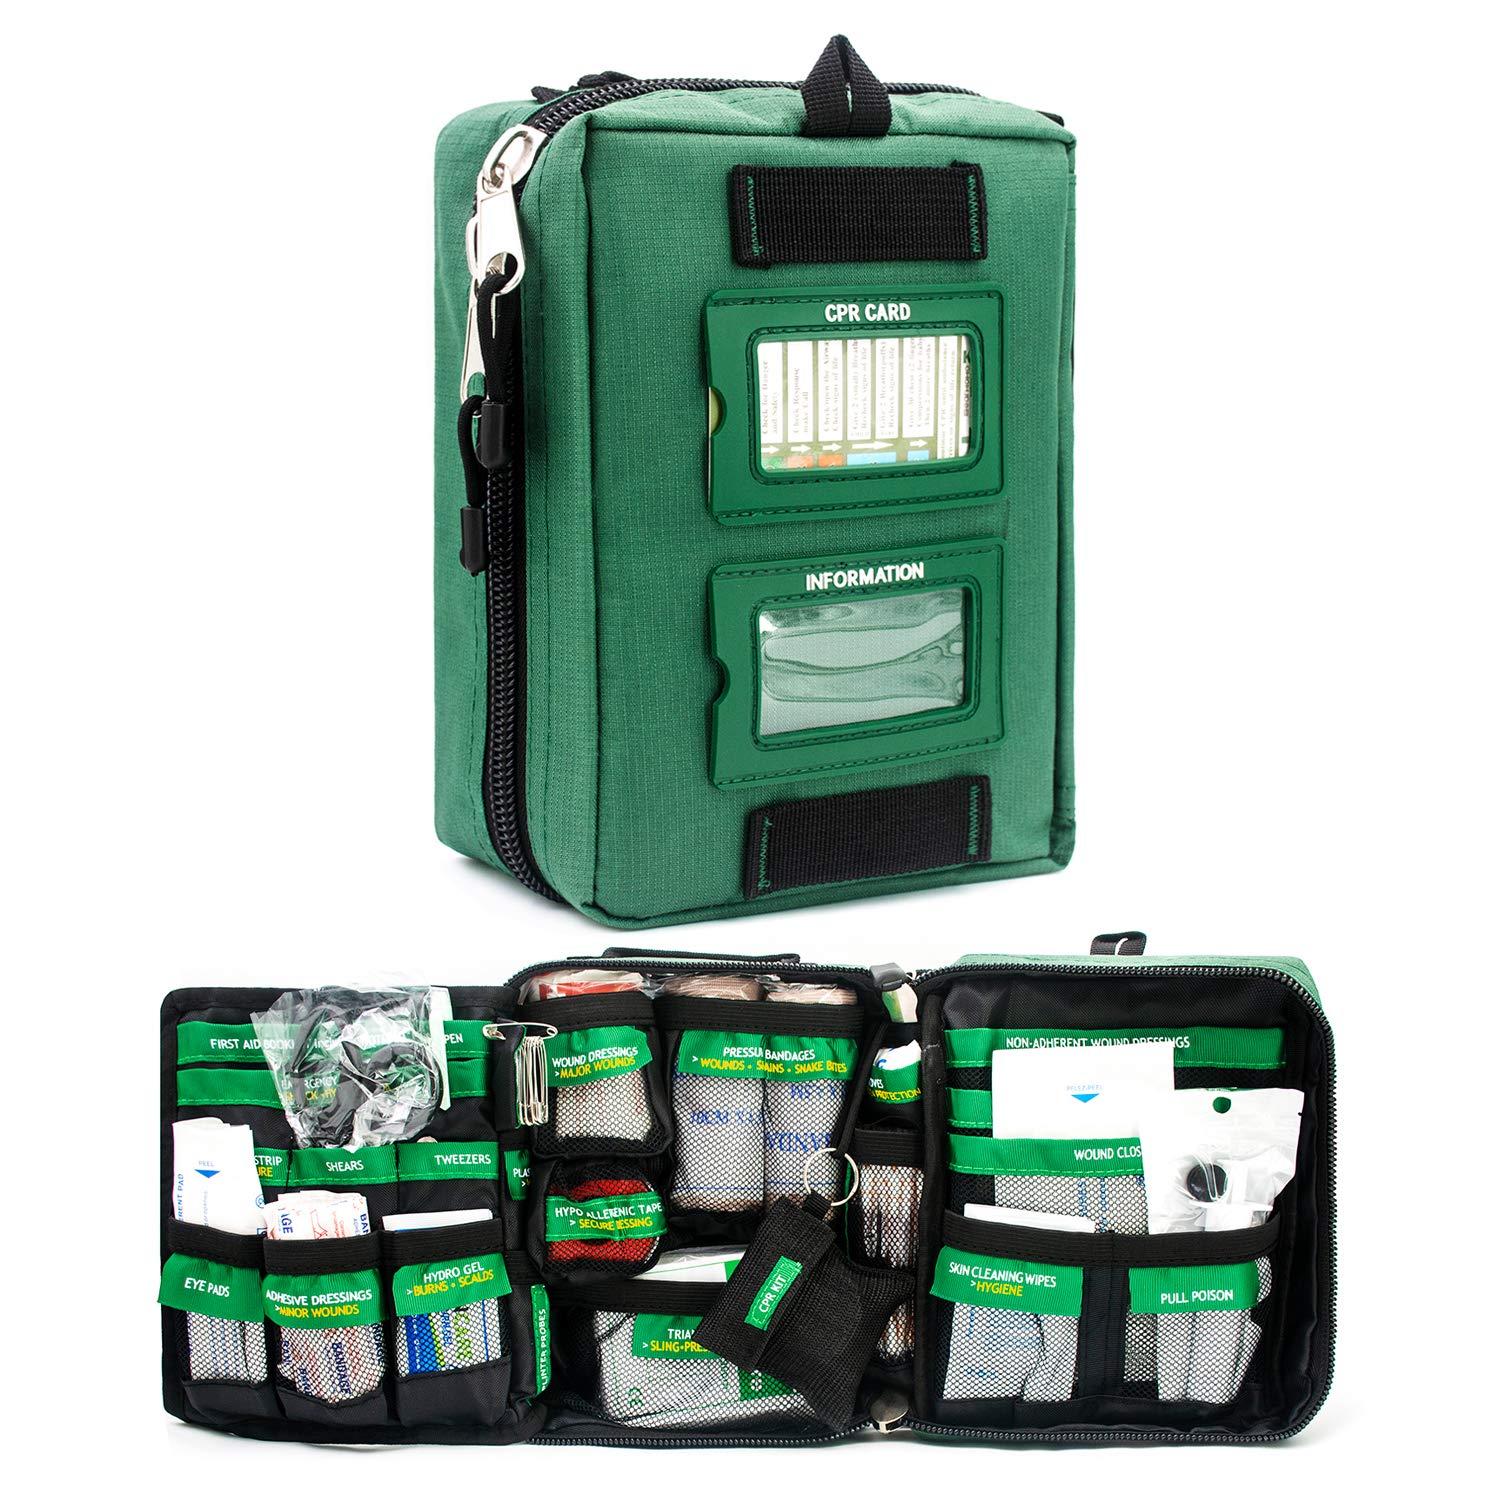 165 Pieces Handy and Comprehensive First Aid Kit Bag – Includes Emergency Blanket, Wound Closures, Bandages and Dressings - Suitable for Home, Office, Camping, Workplace, Car and Travel